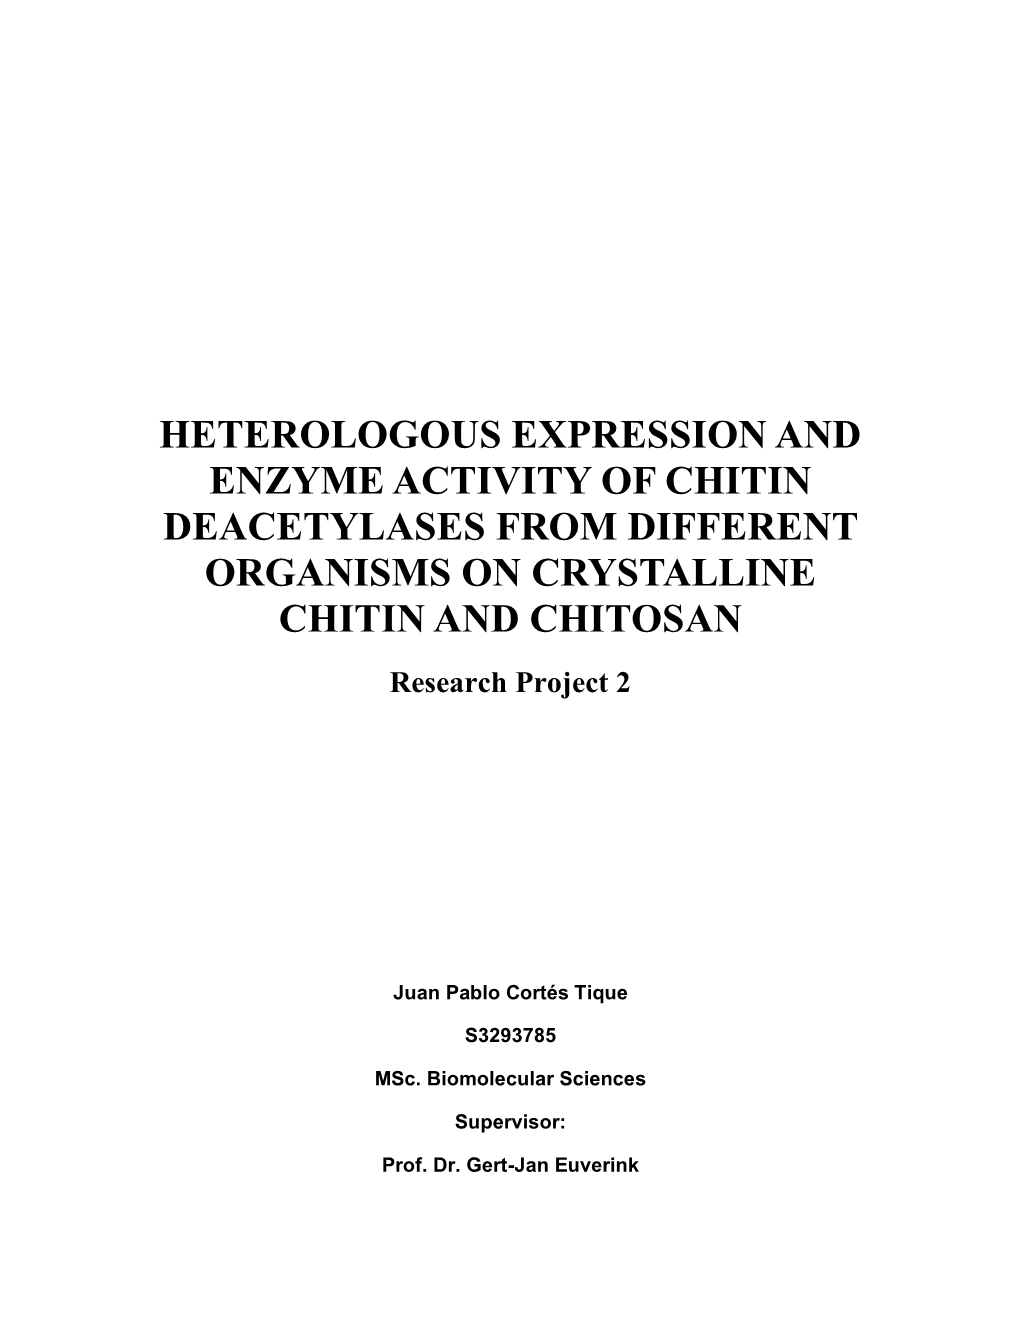 HETEROLOGOUS EXPRESSION and ENZYME ACTIVITY of CHITIN DEACETYLASES from DIFFERENT ORGANISMS on CRYSTALLINE CHITIN and CHITOSAN Research Project 2